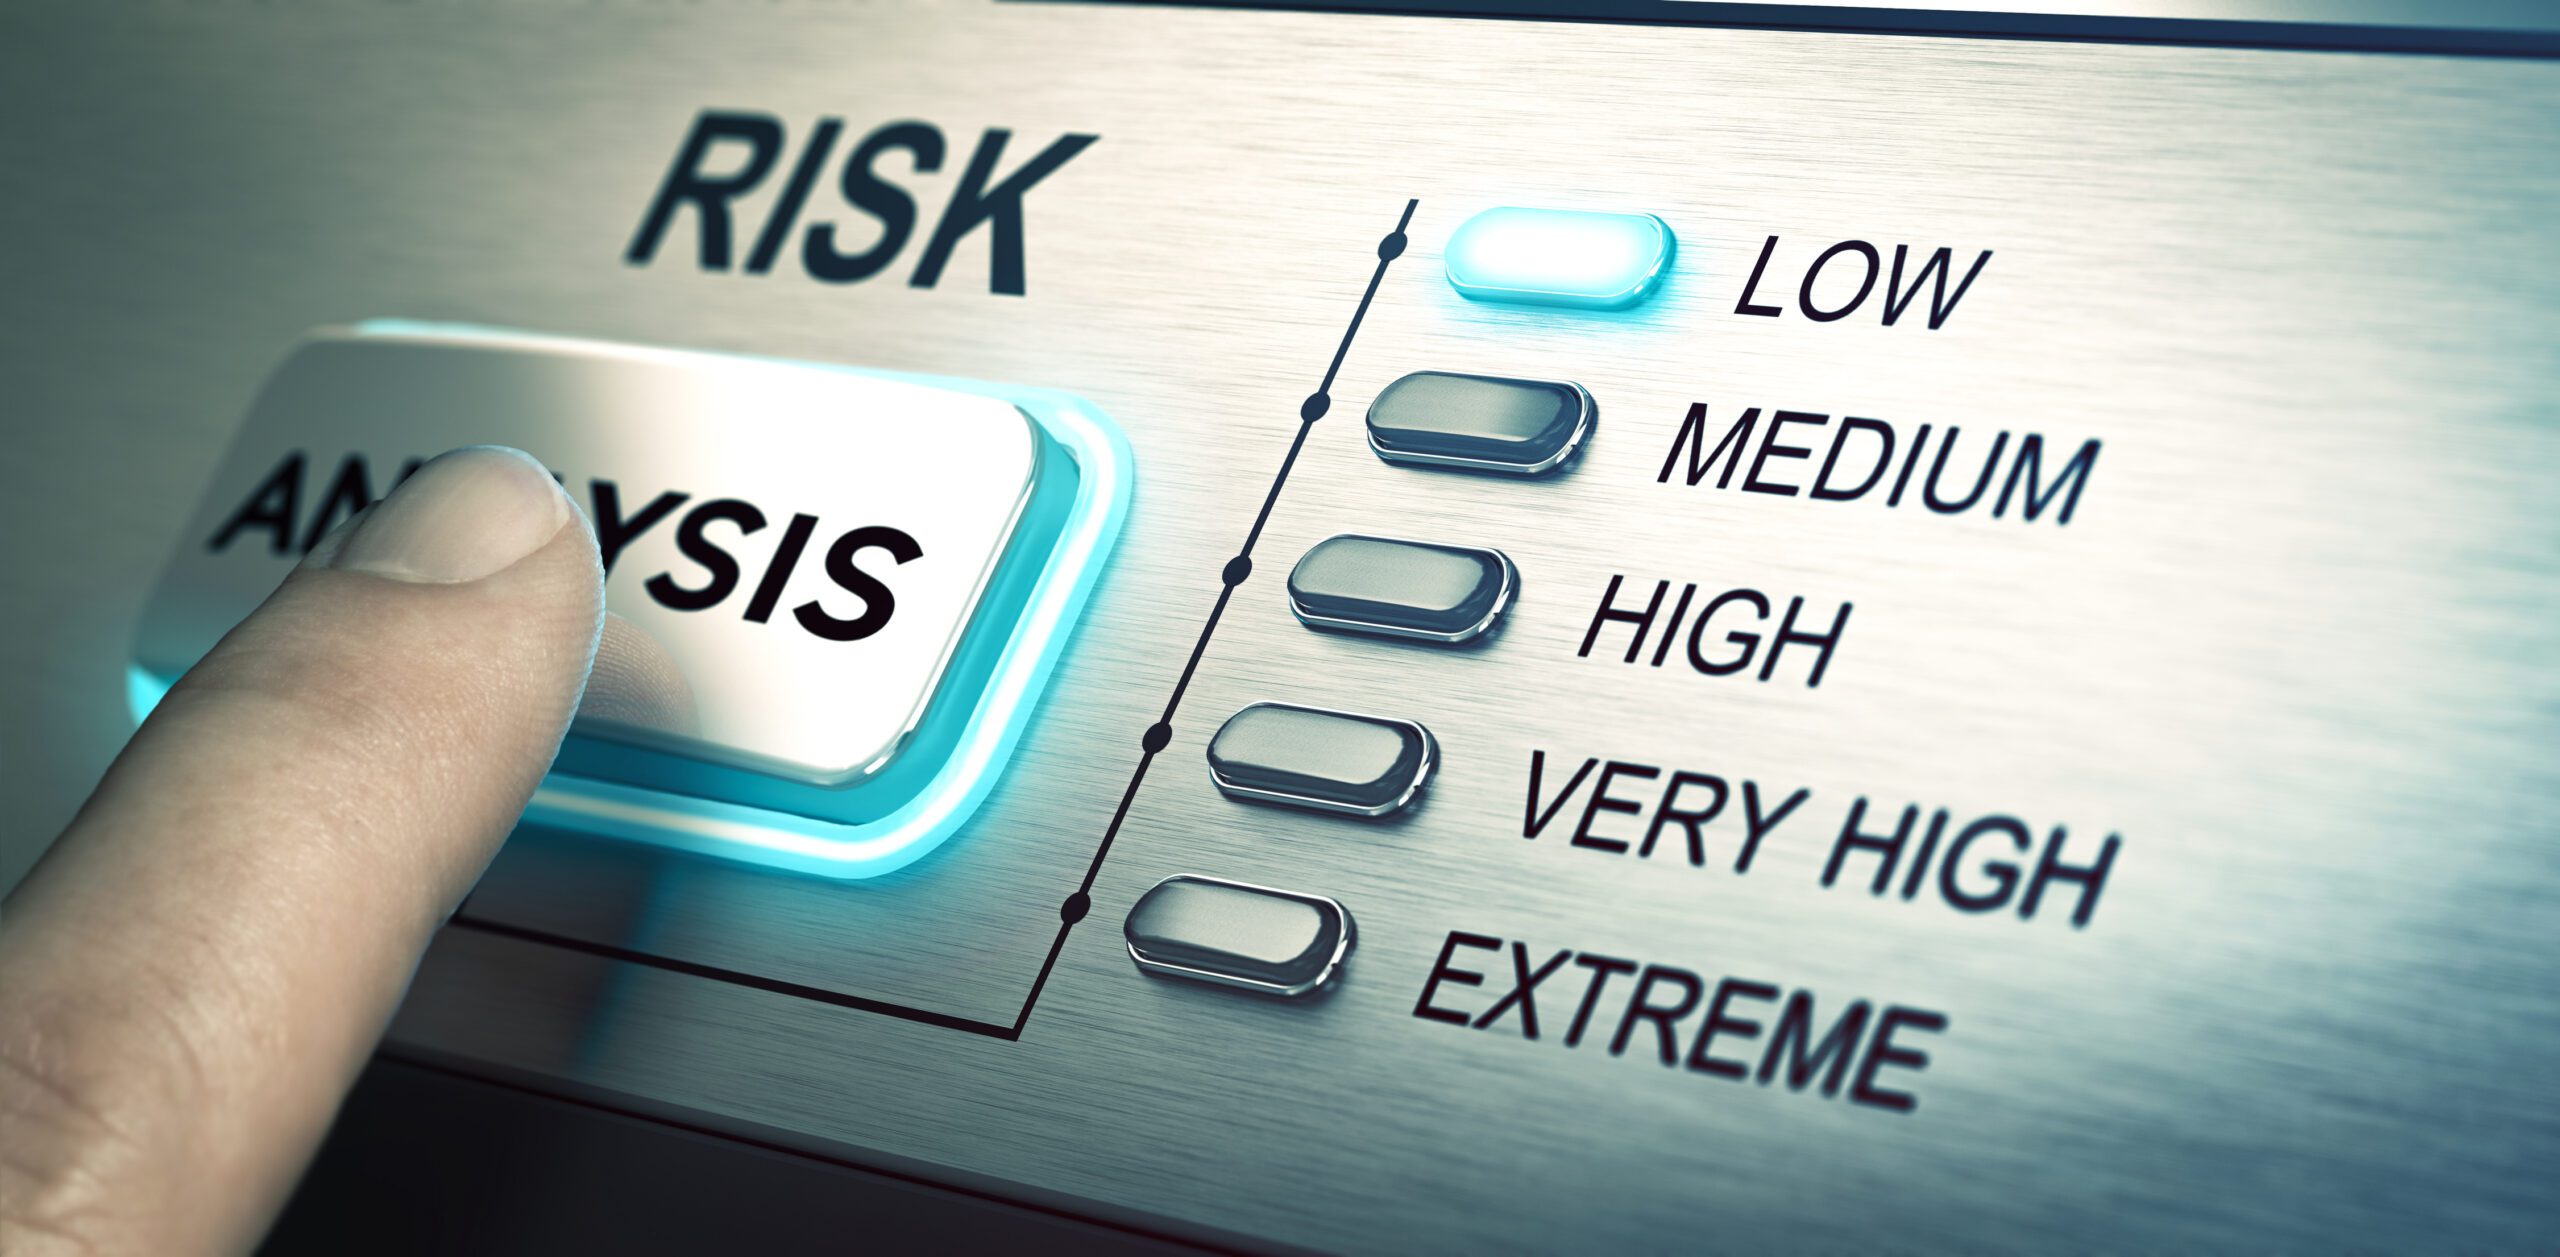 5 Key Questions a Security Risk Assessment Can Answer